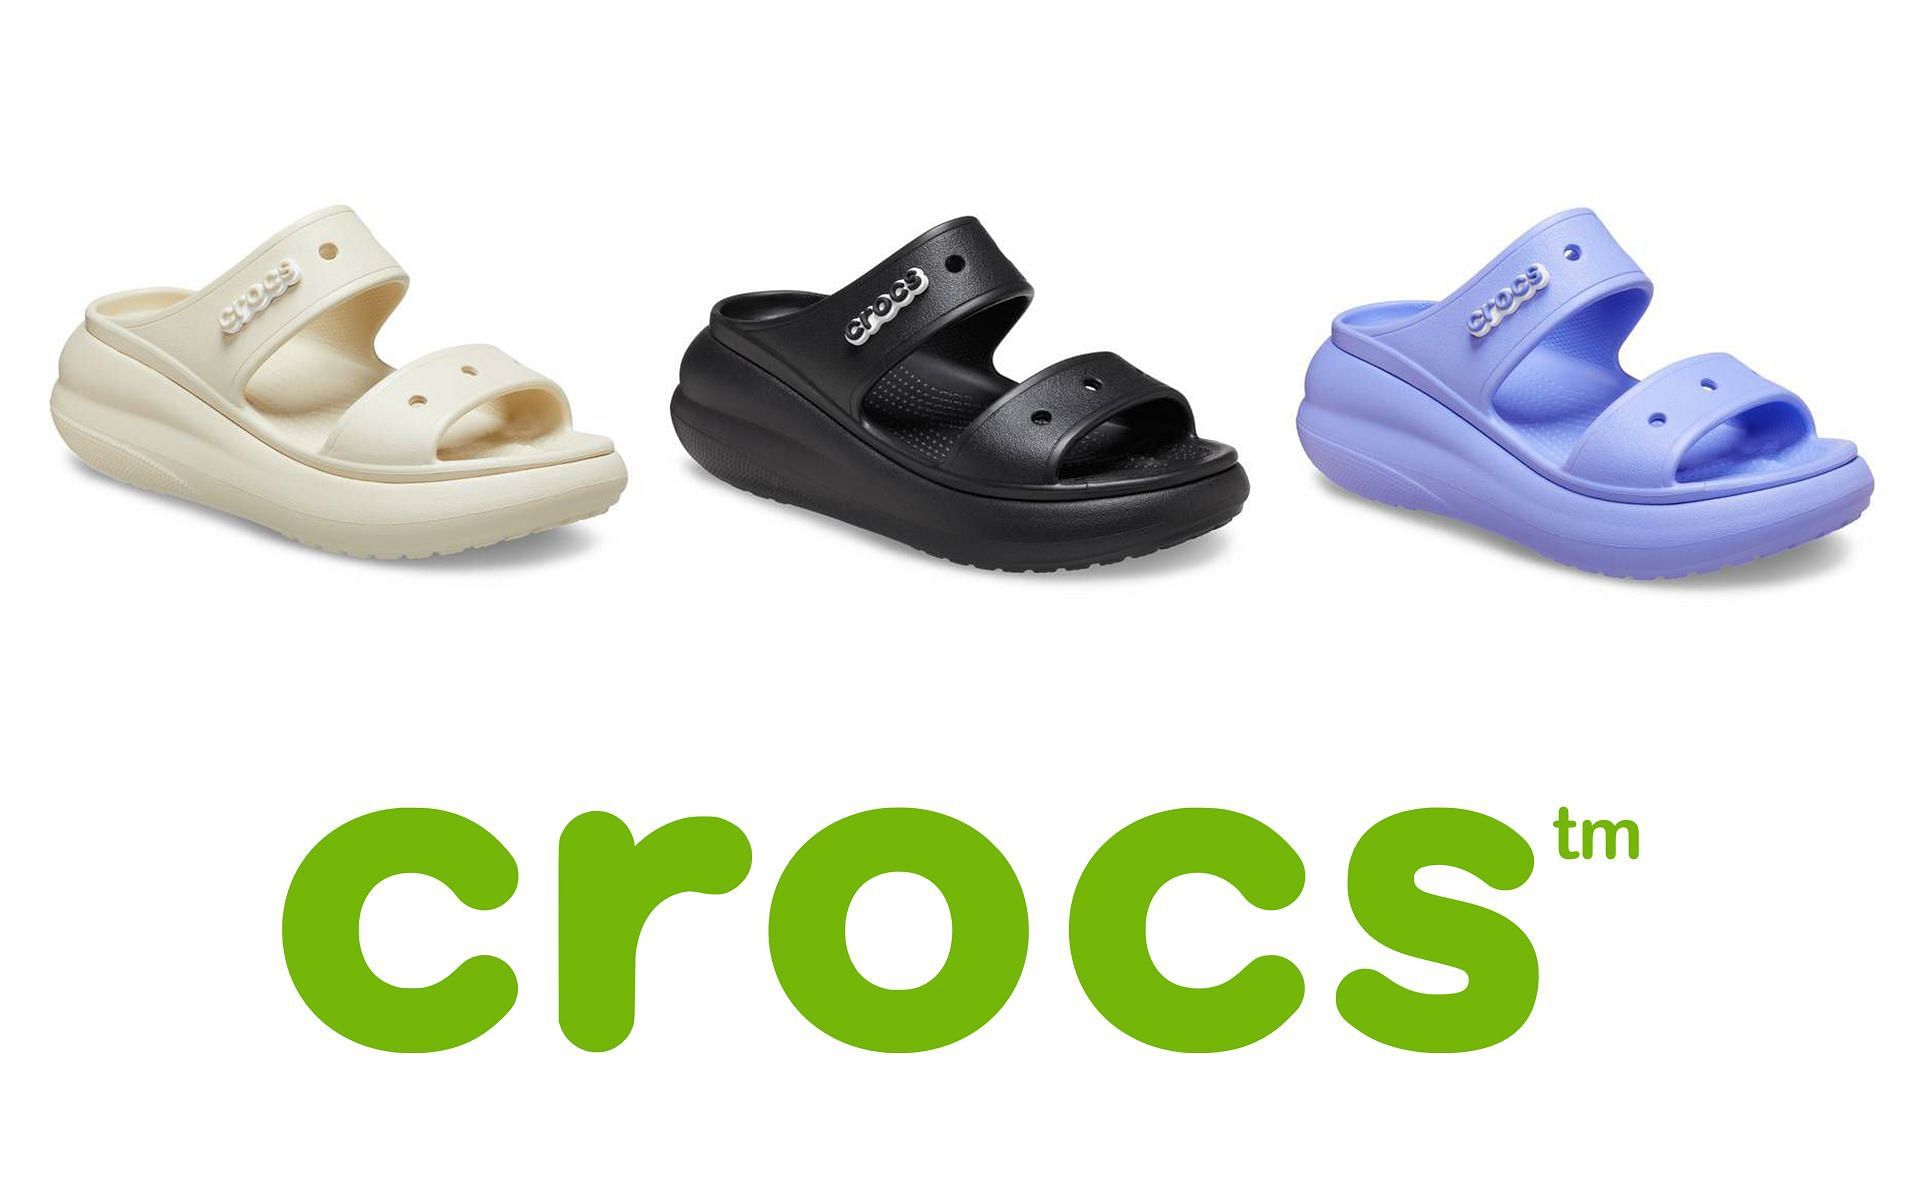 Where to buy Crocs Classic Crush sandals? Price and more details explored